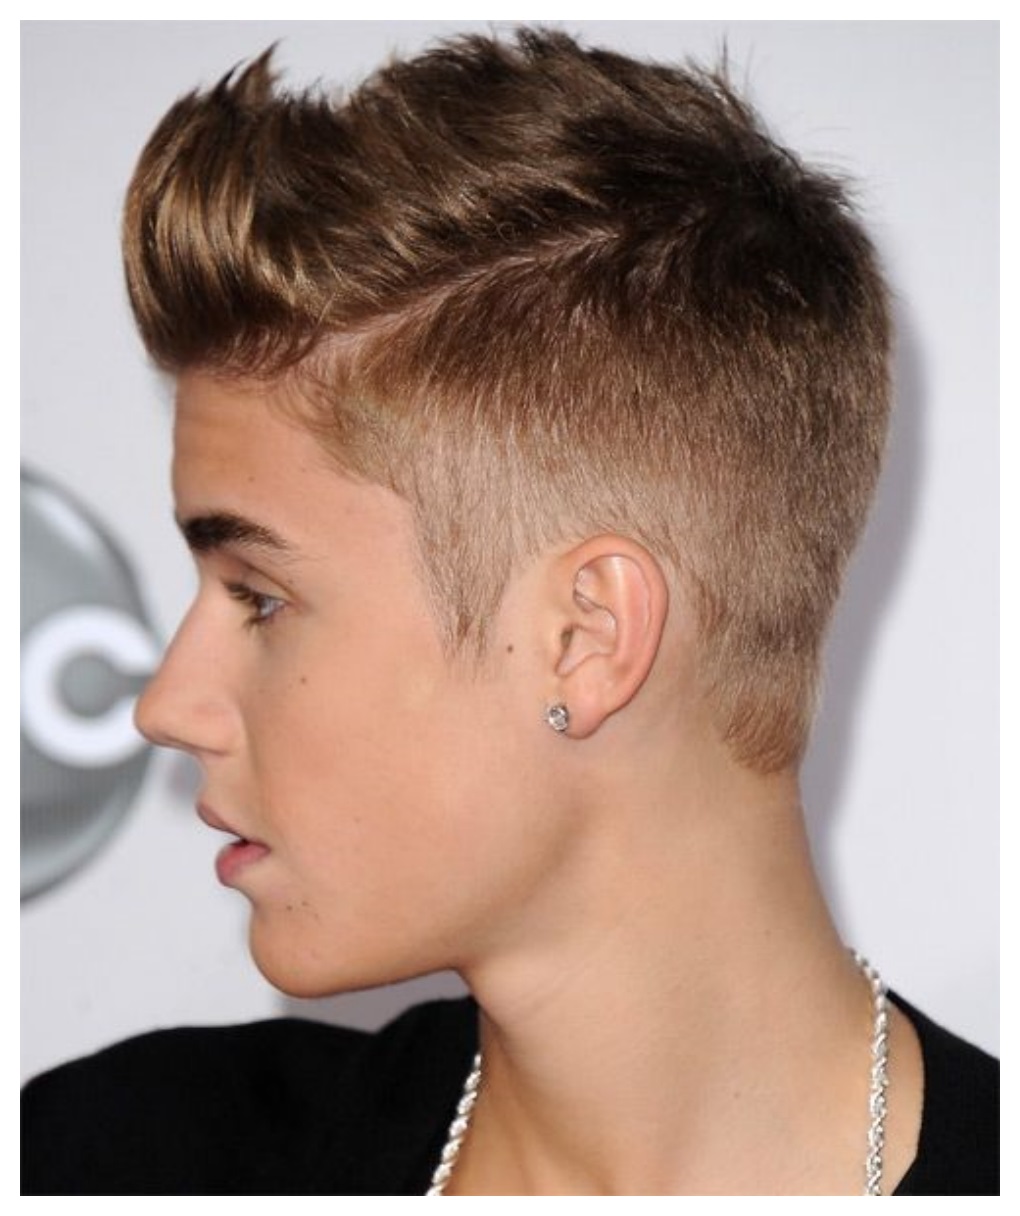 Justin Bieber Hairstyle Wallpapers for mobile